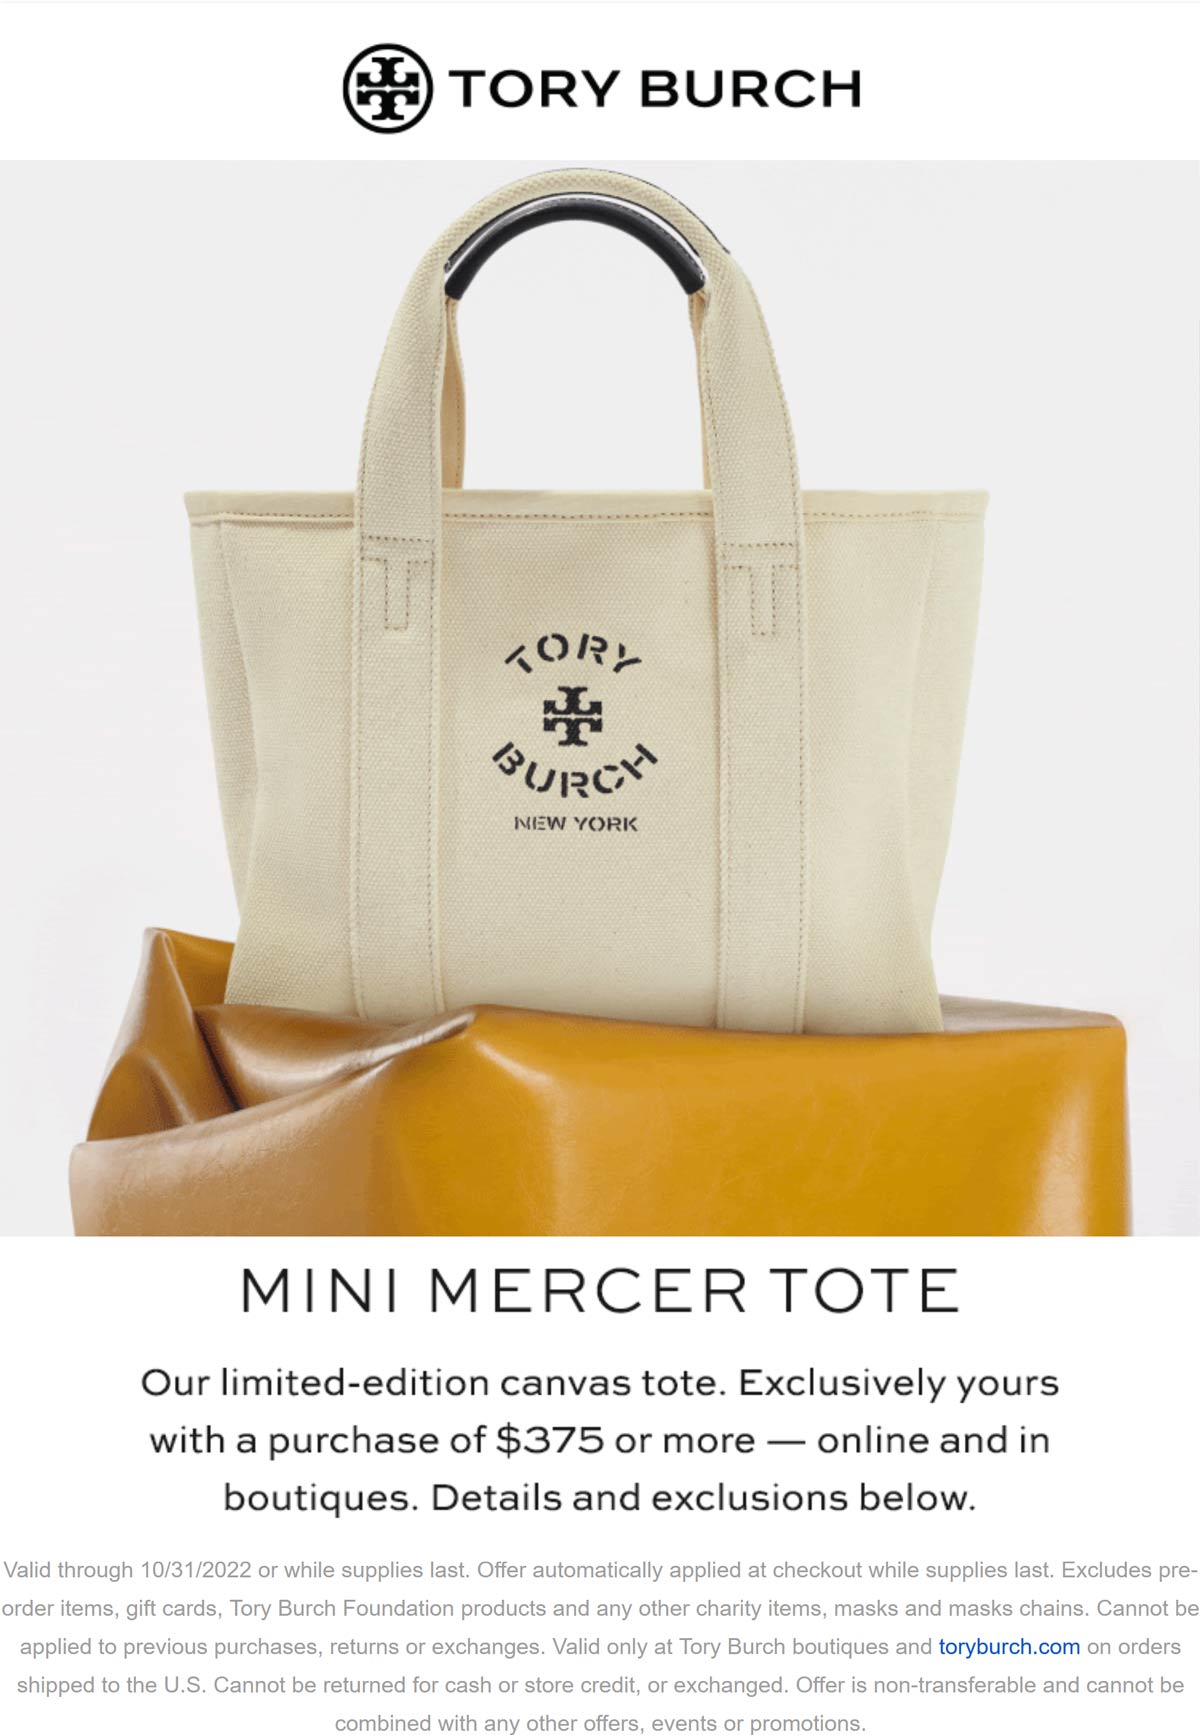 Tory Burch stores Coupon  Free tote bag on $375 at Tory Burch, ditto online #toryburch 